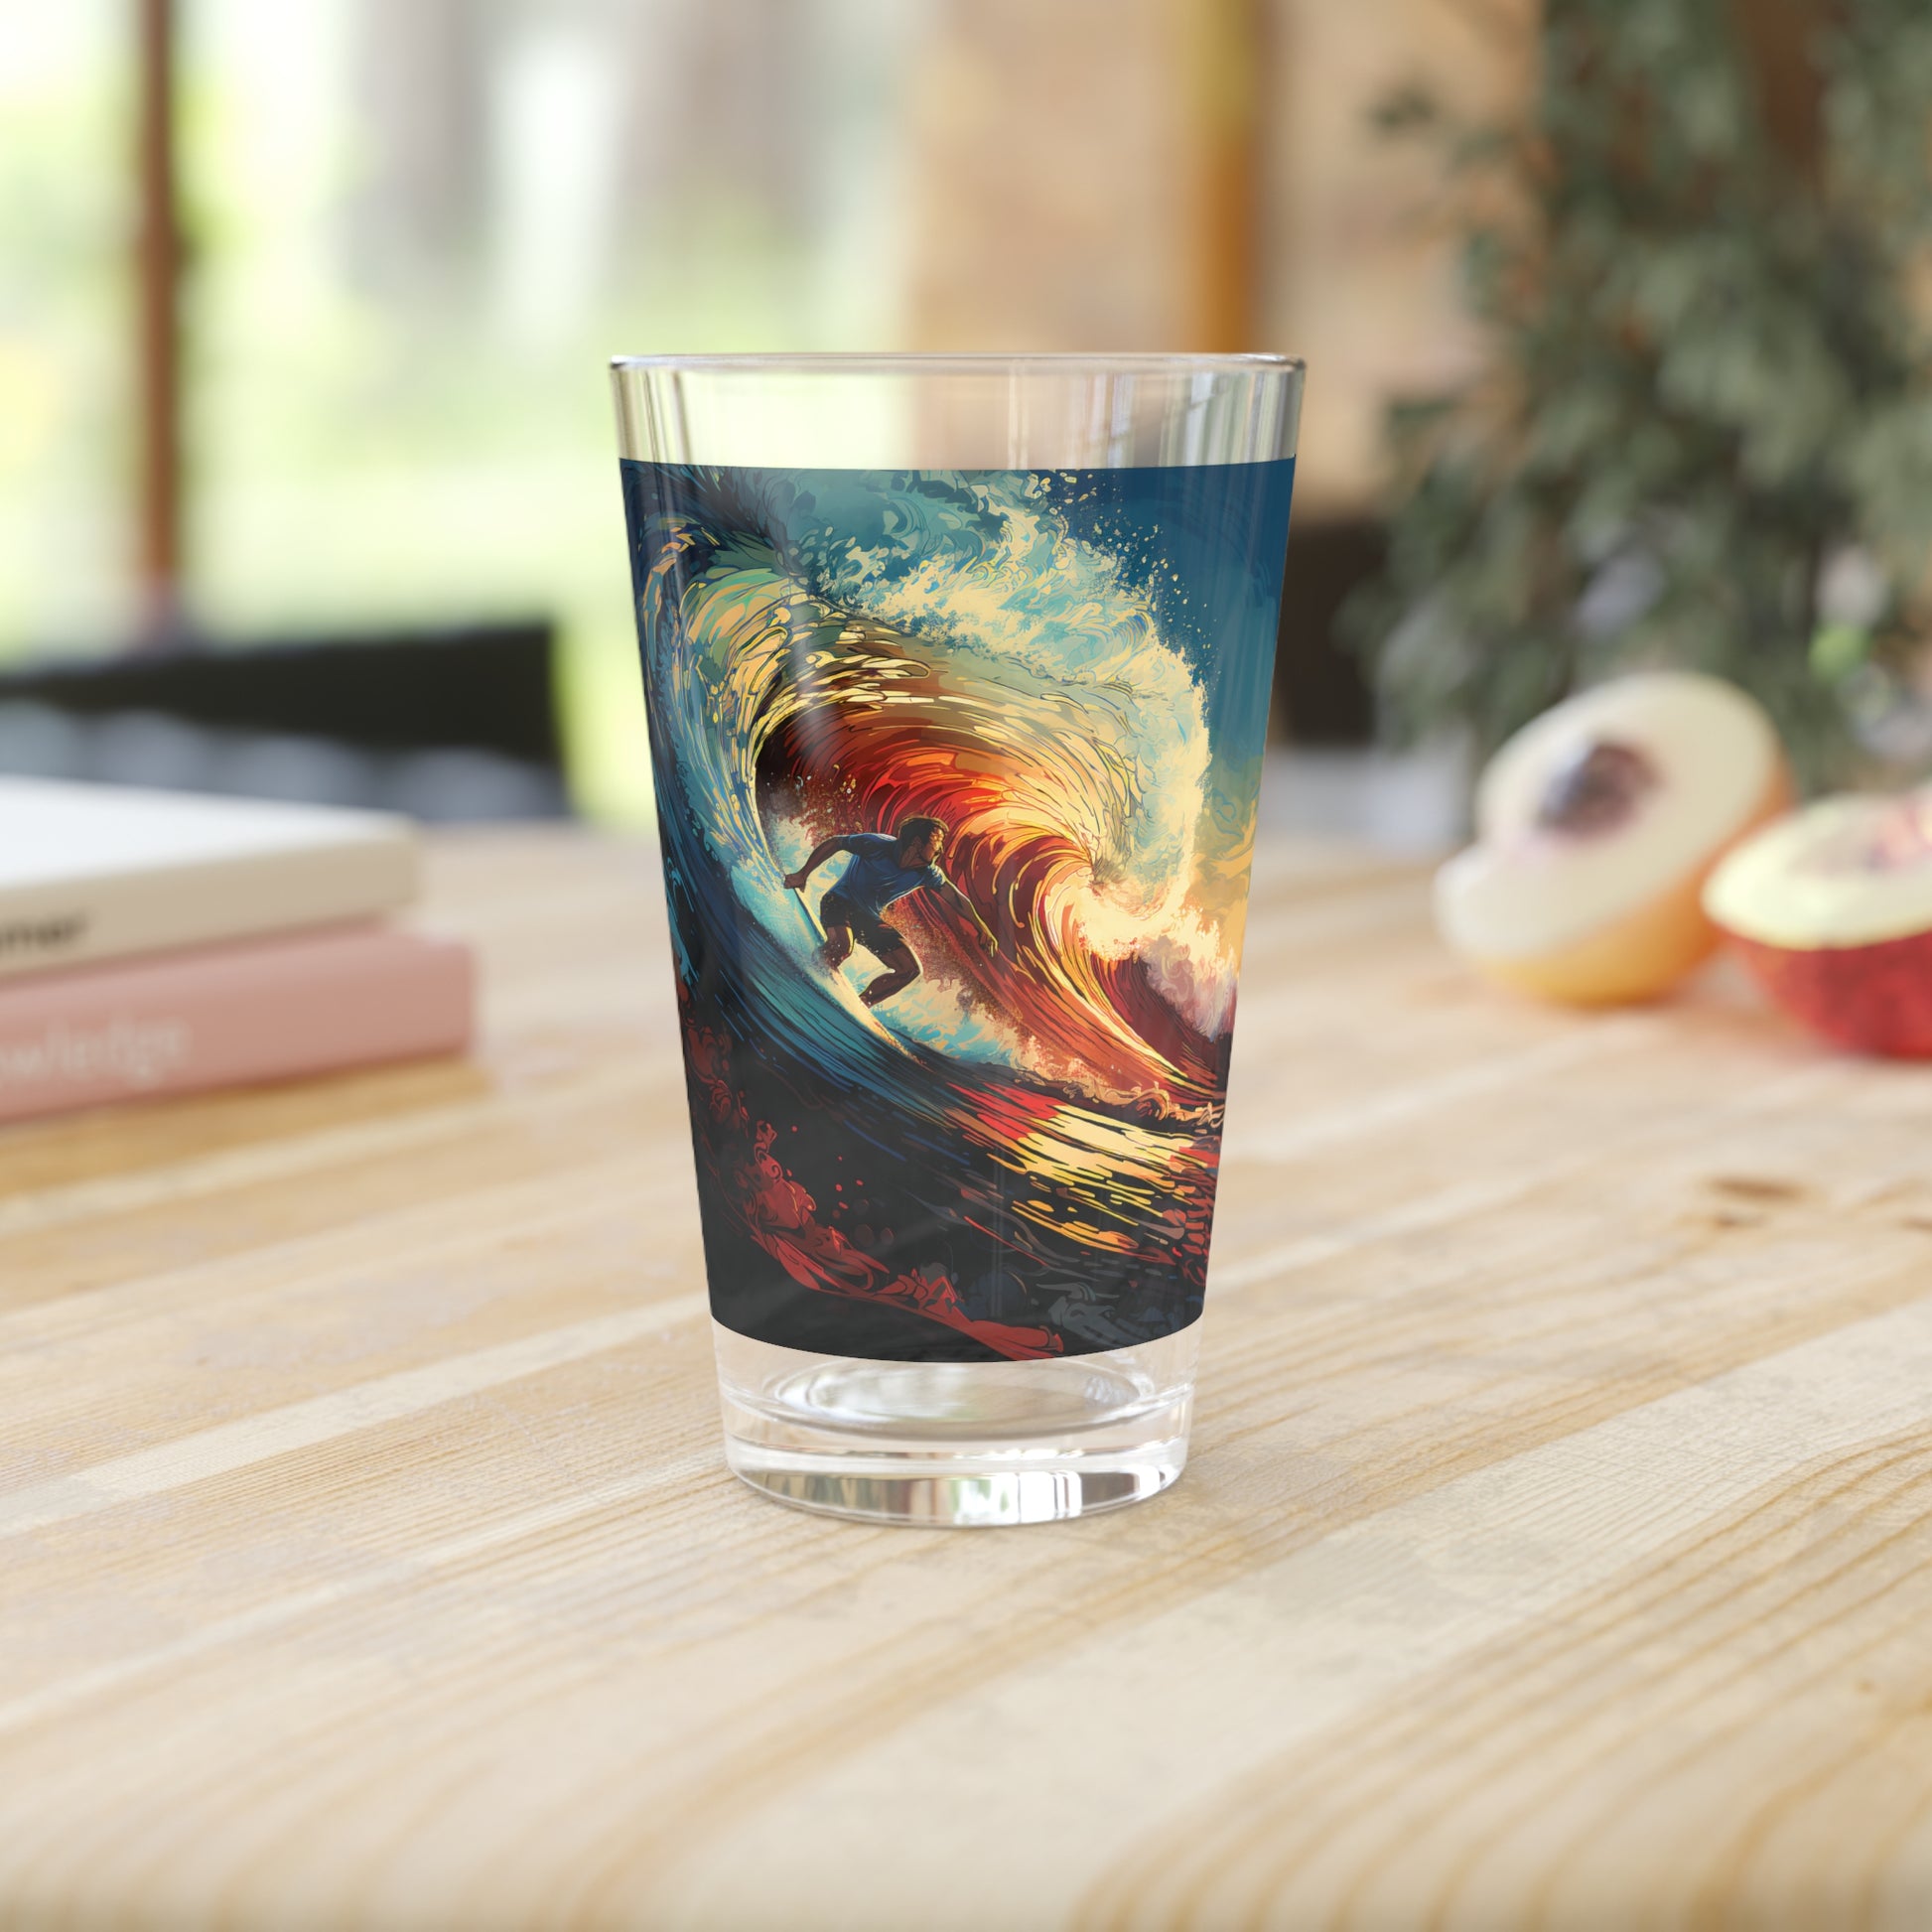 Surfing Color Waves Pint Glass: where art meets functionality. Waves Design #019 encapsulates the joy of riding waves in a vivid, eye-catching design.